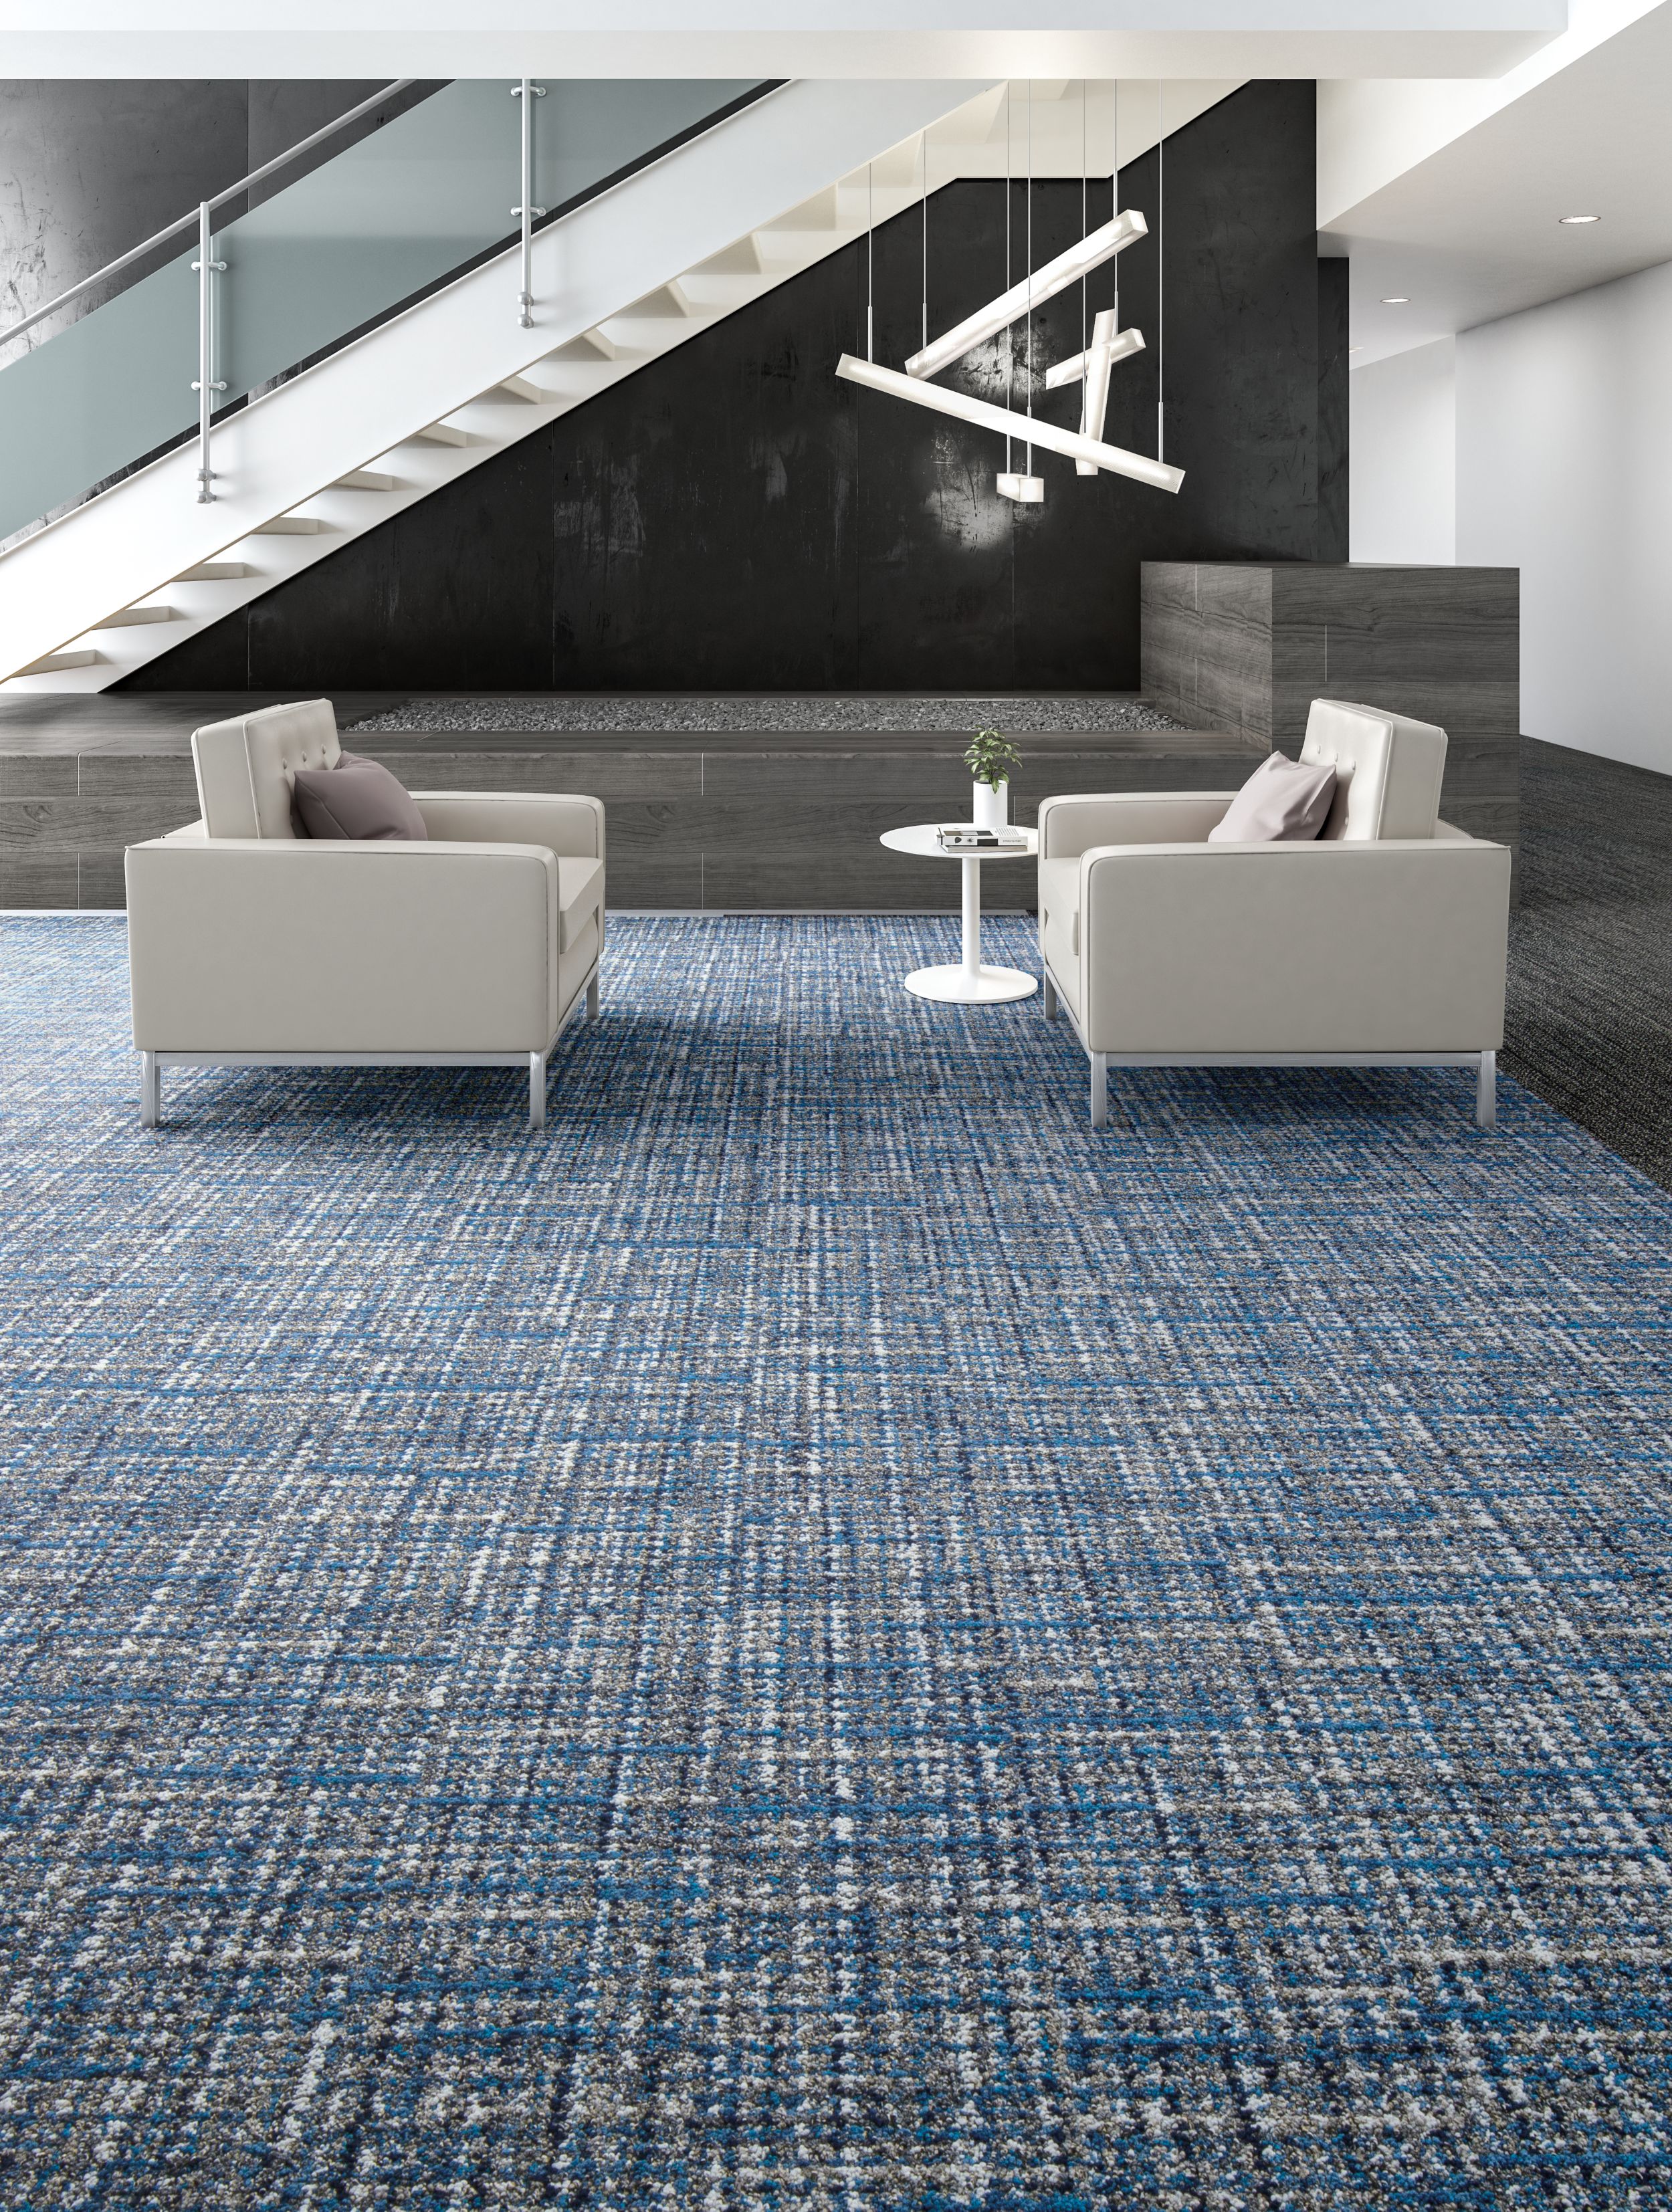 Interface WW895 plank carpet tile in lobby area with couches and side table  afbeeldingnummer 7